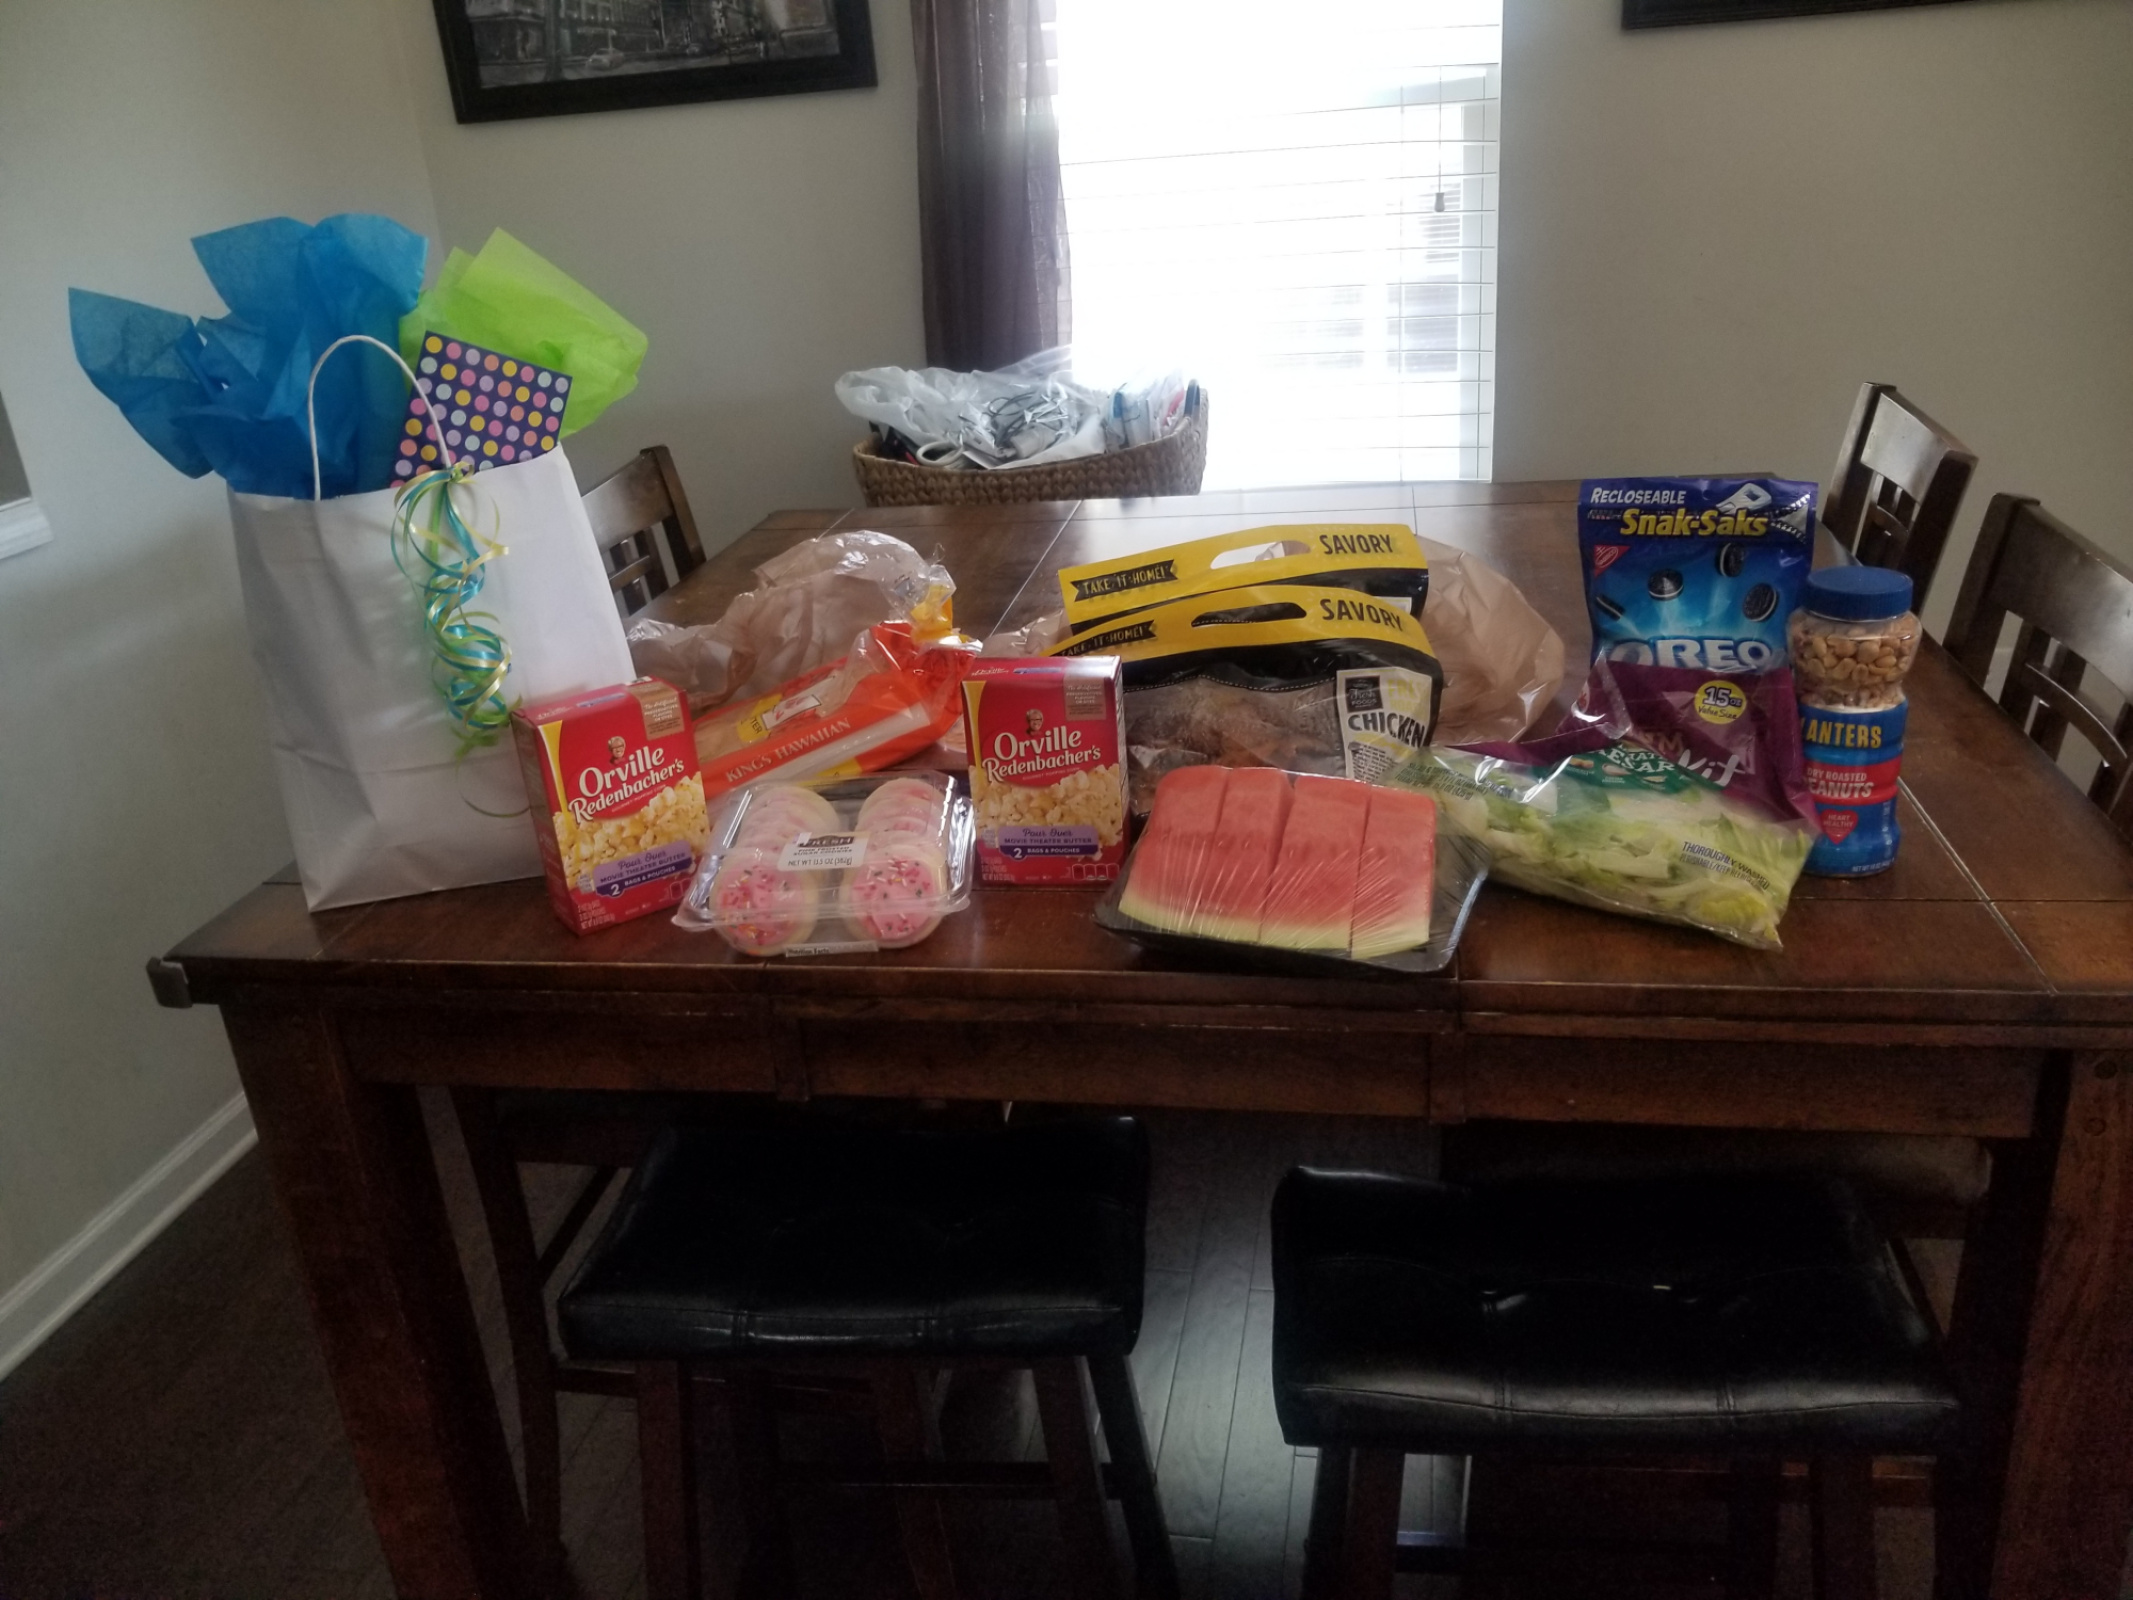 Thank you to the Menesses family for providing meals and a care package for Chris. 